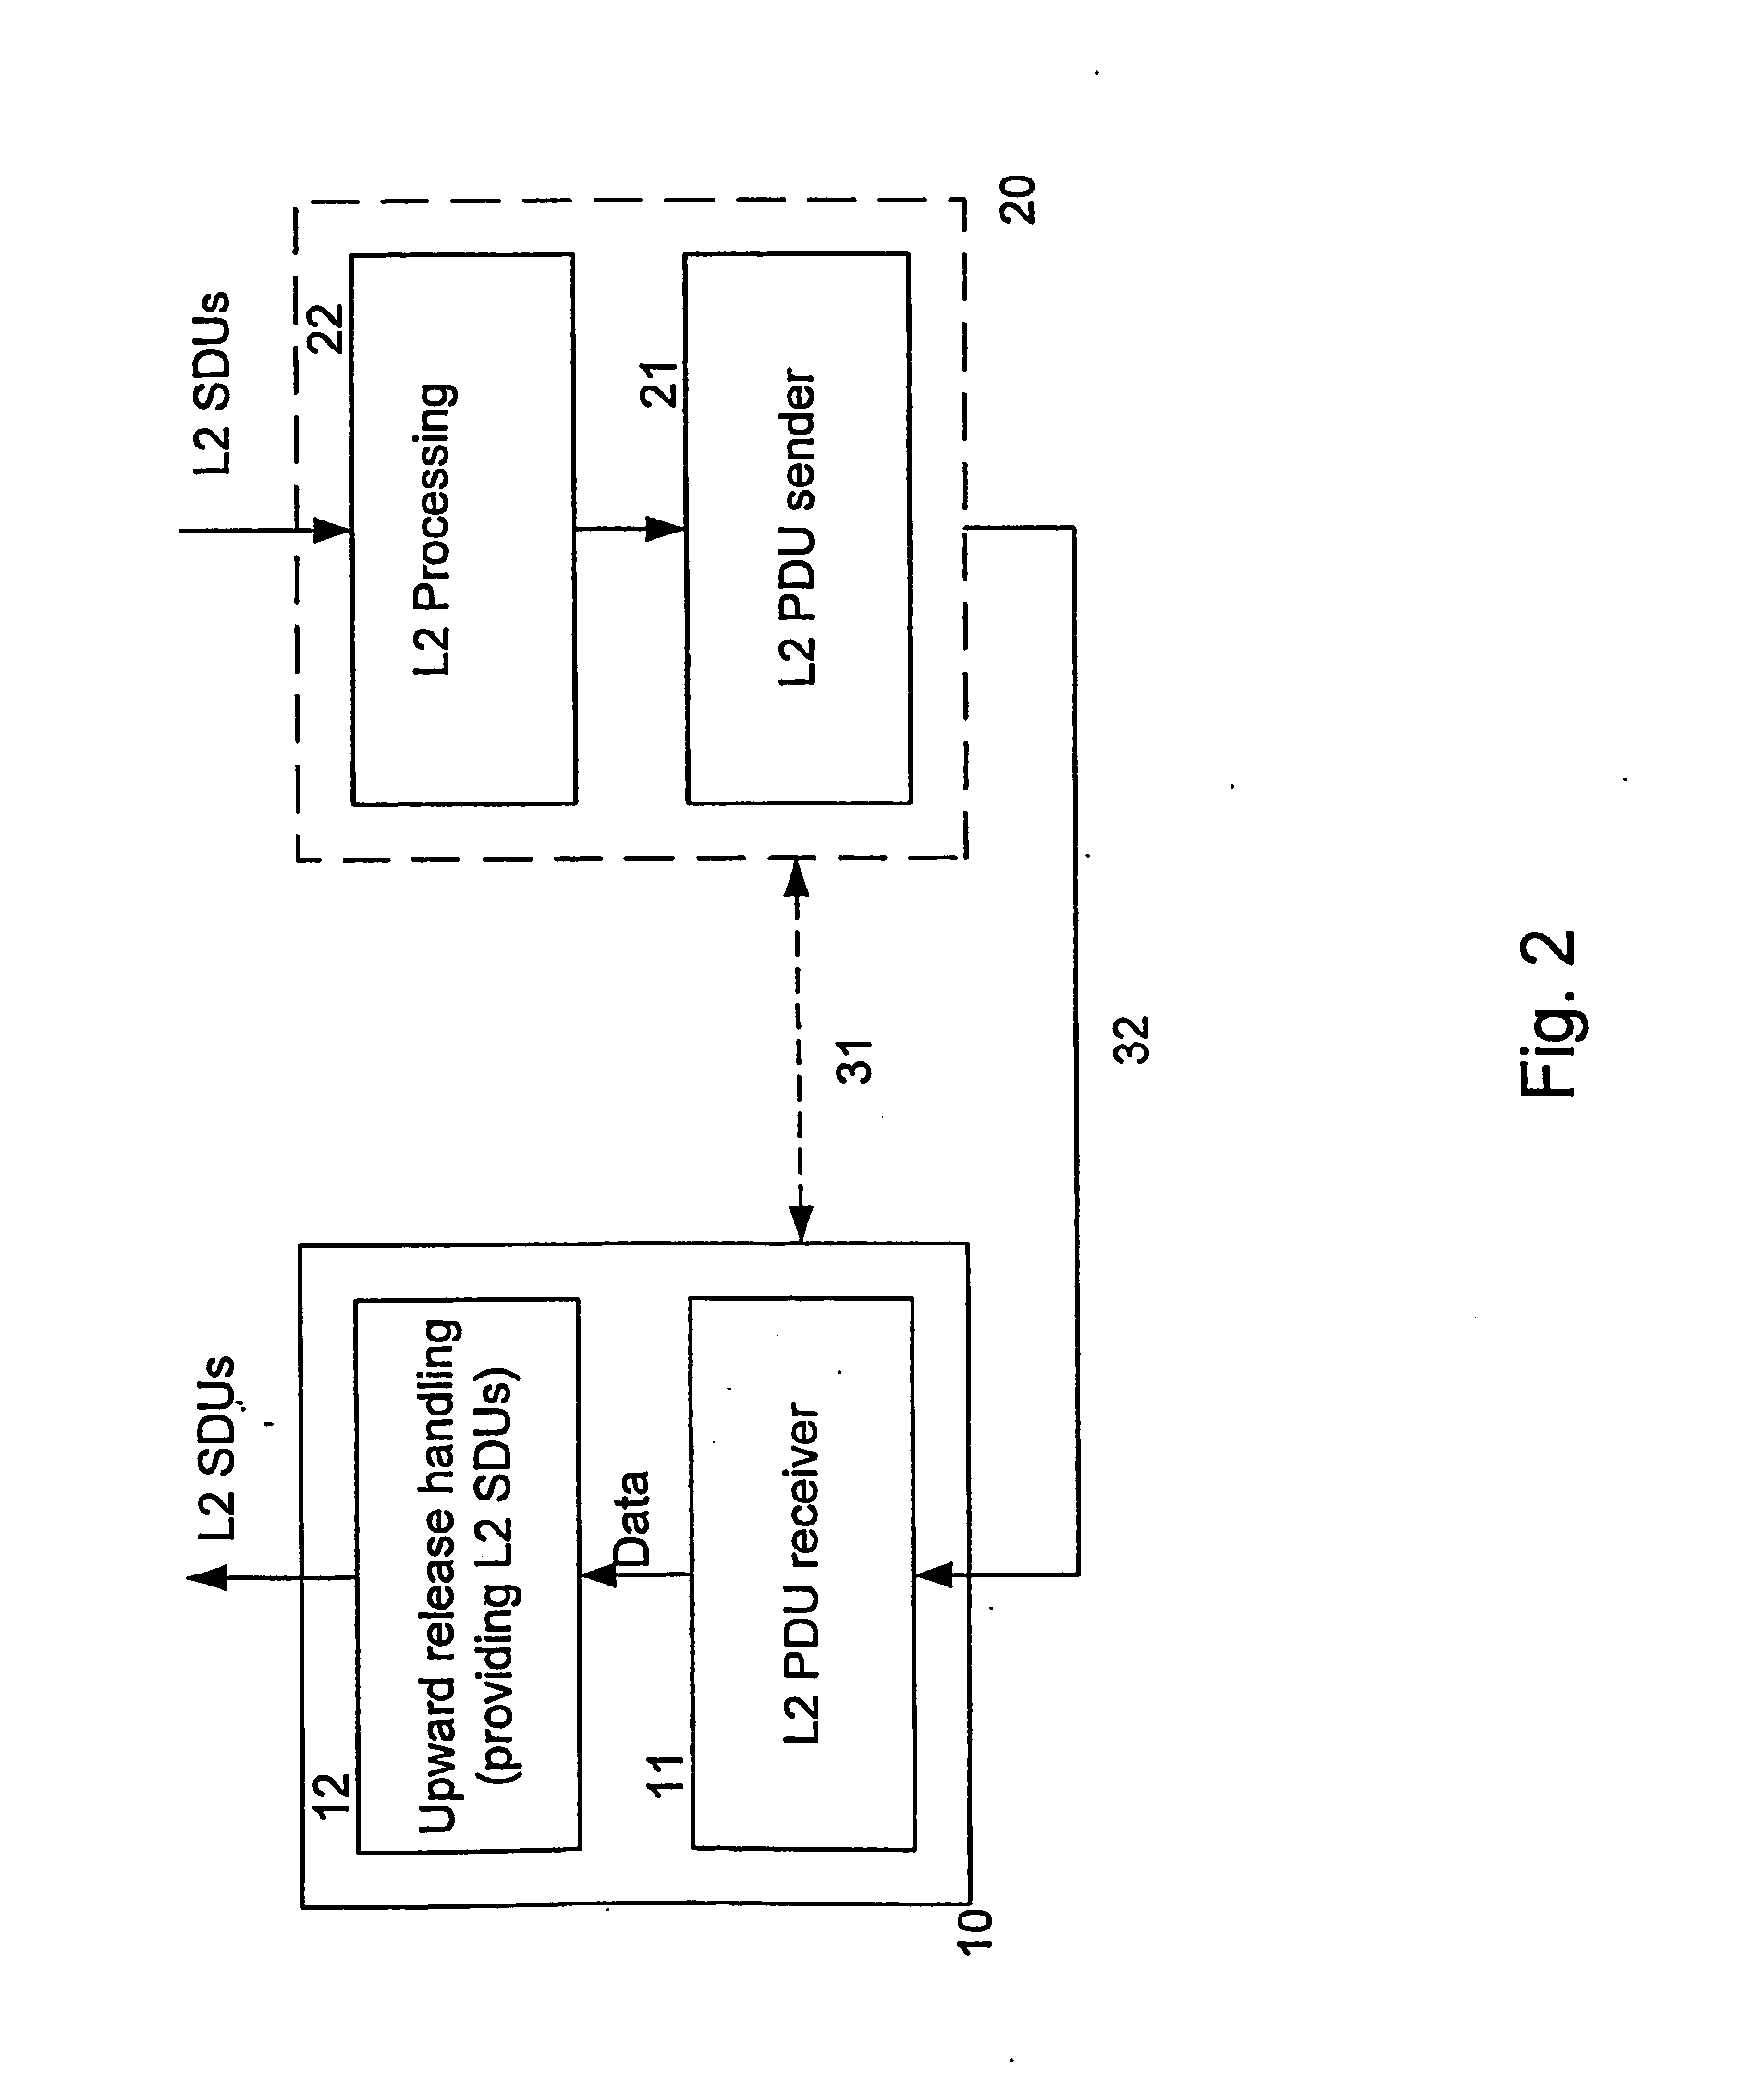 Semi-reliable arq method and device thereof